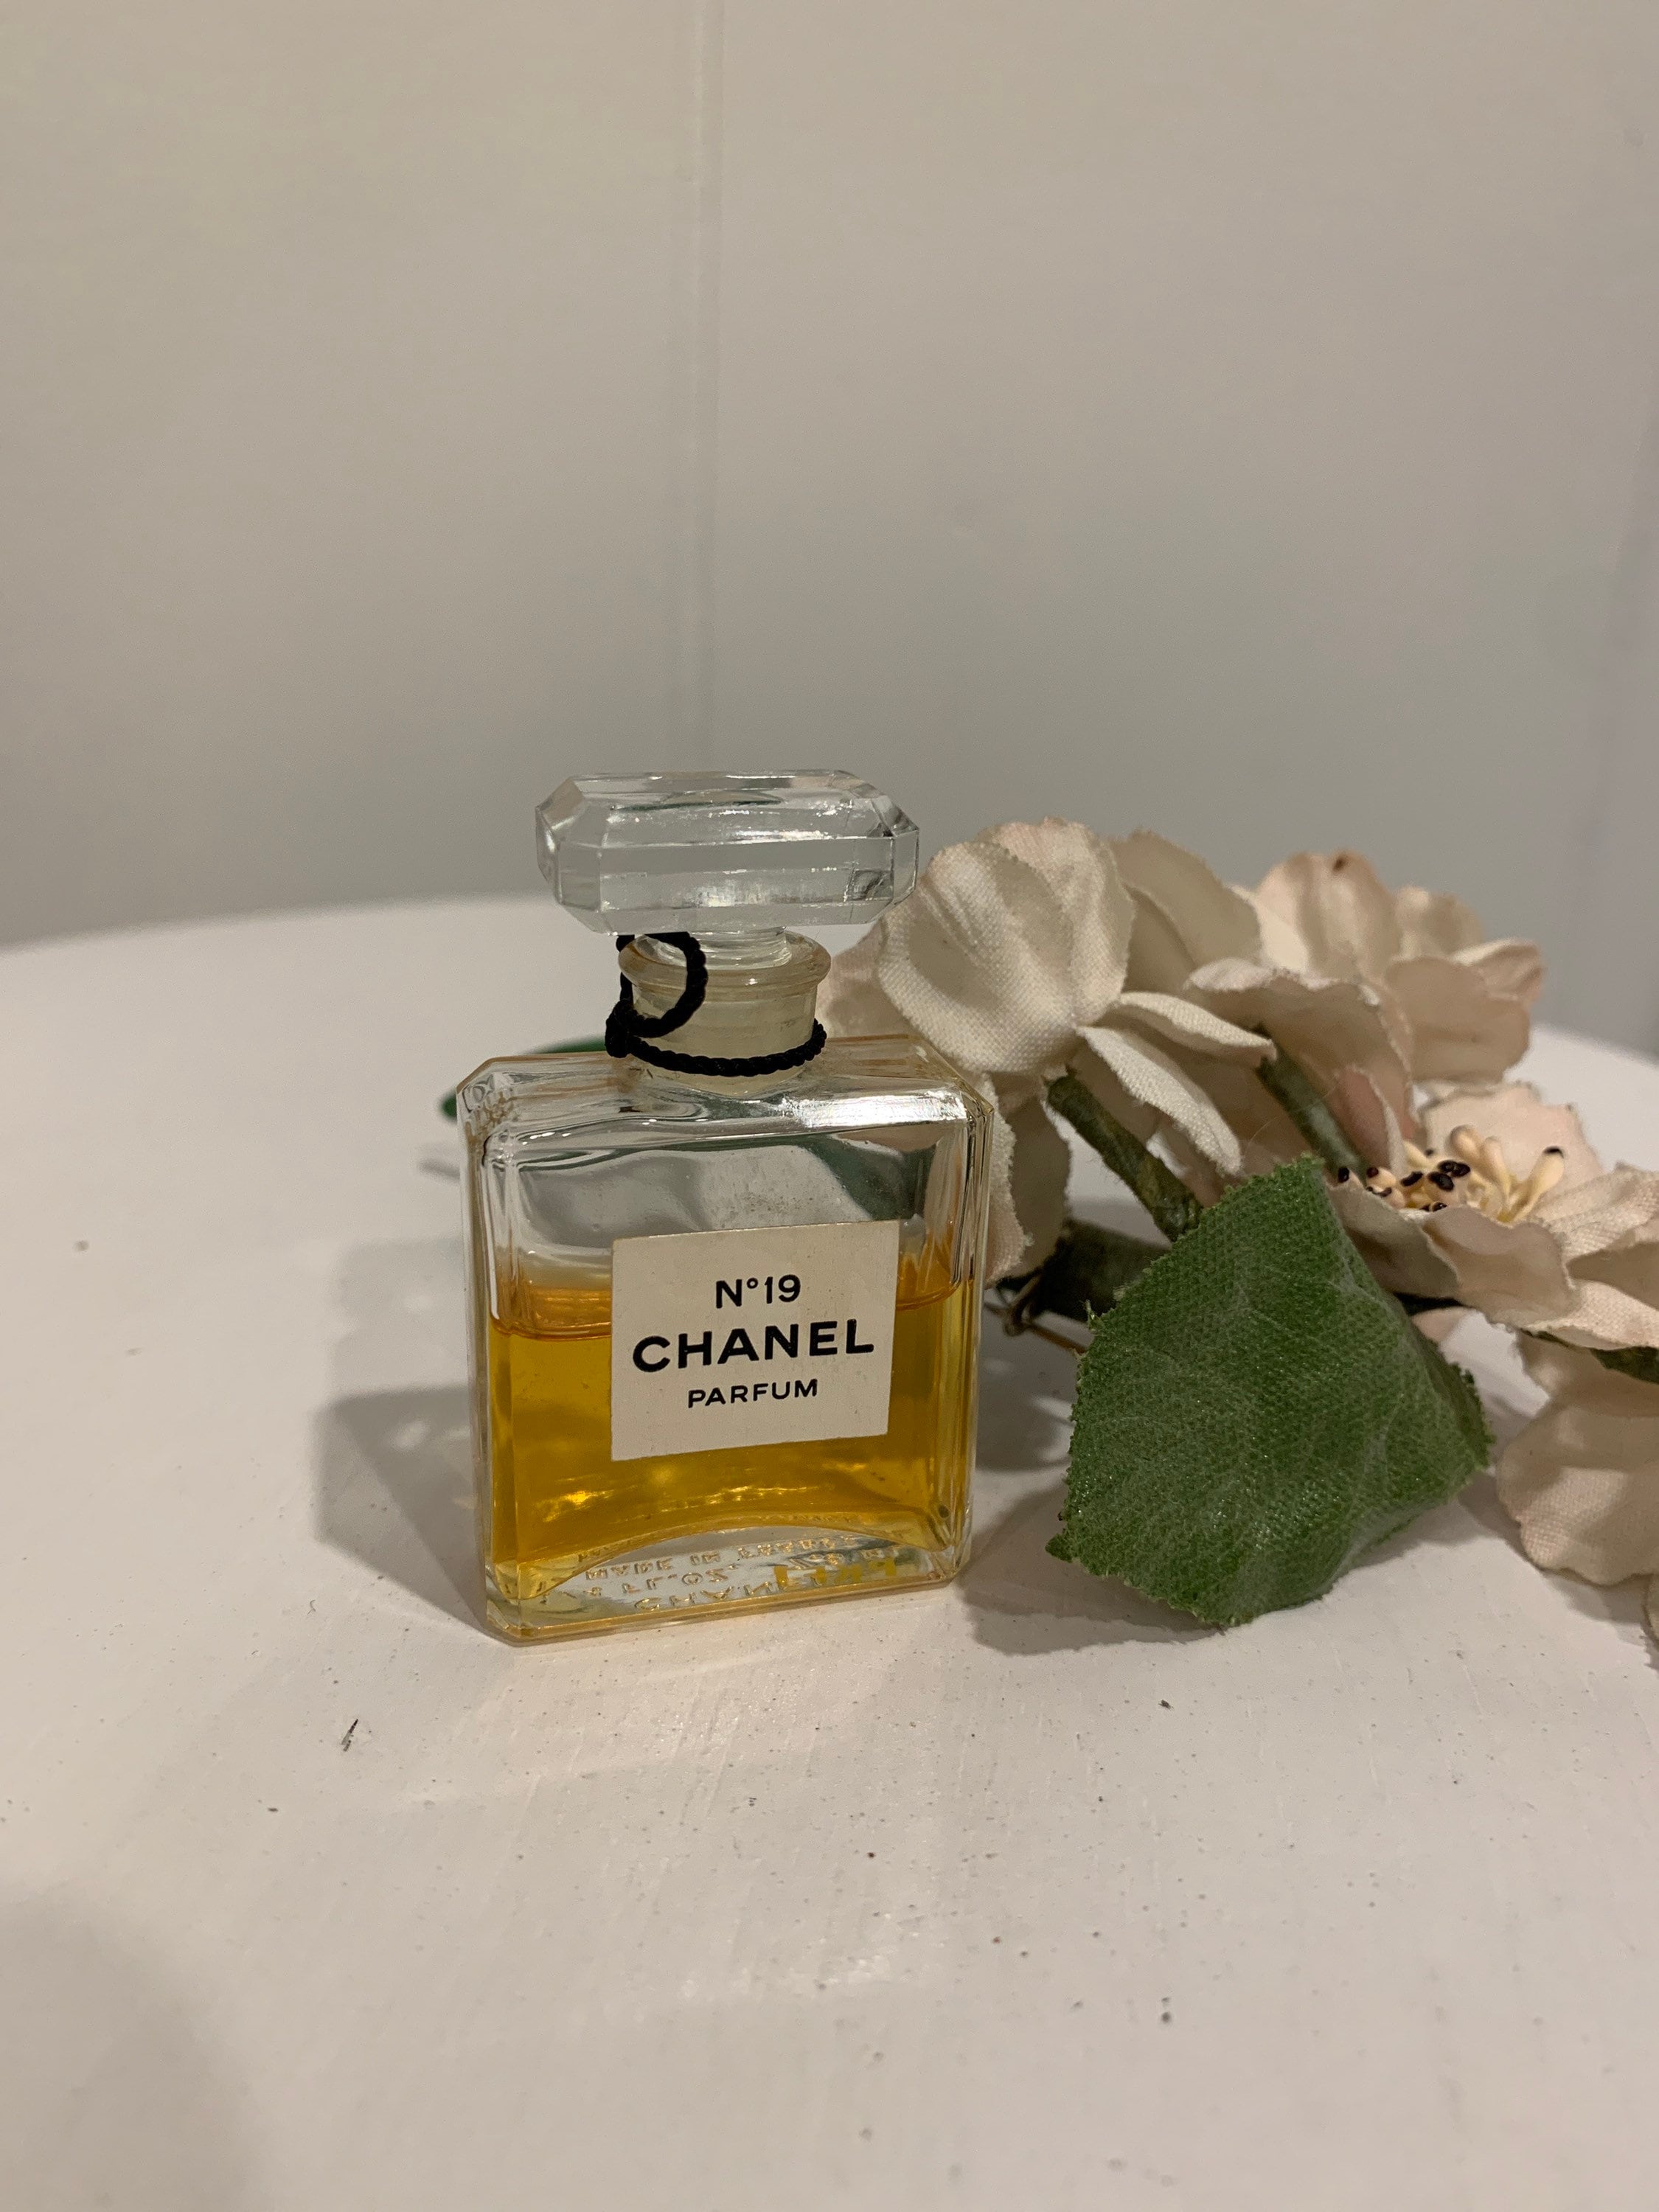 Chanel No 19 Parfum Used Bottle Collectible 